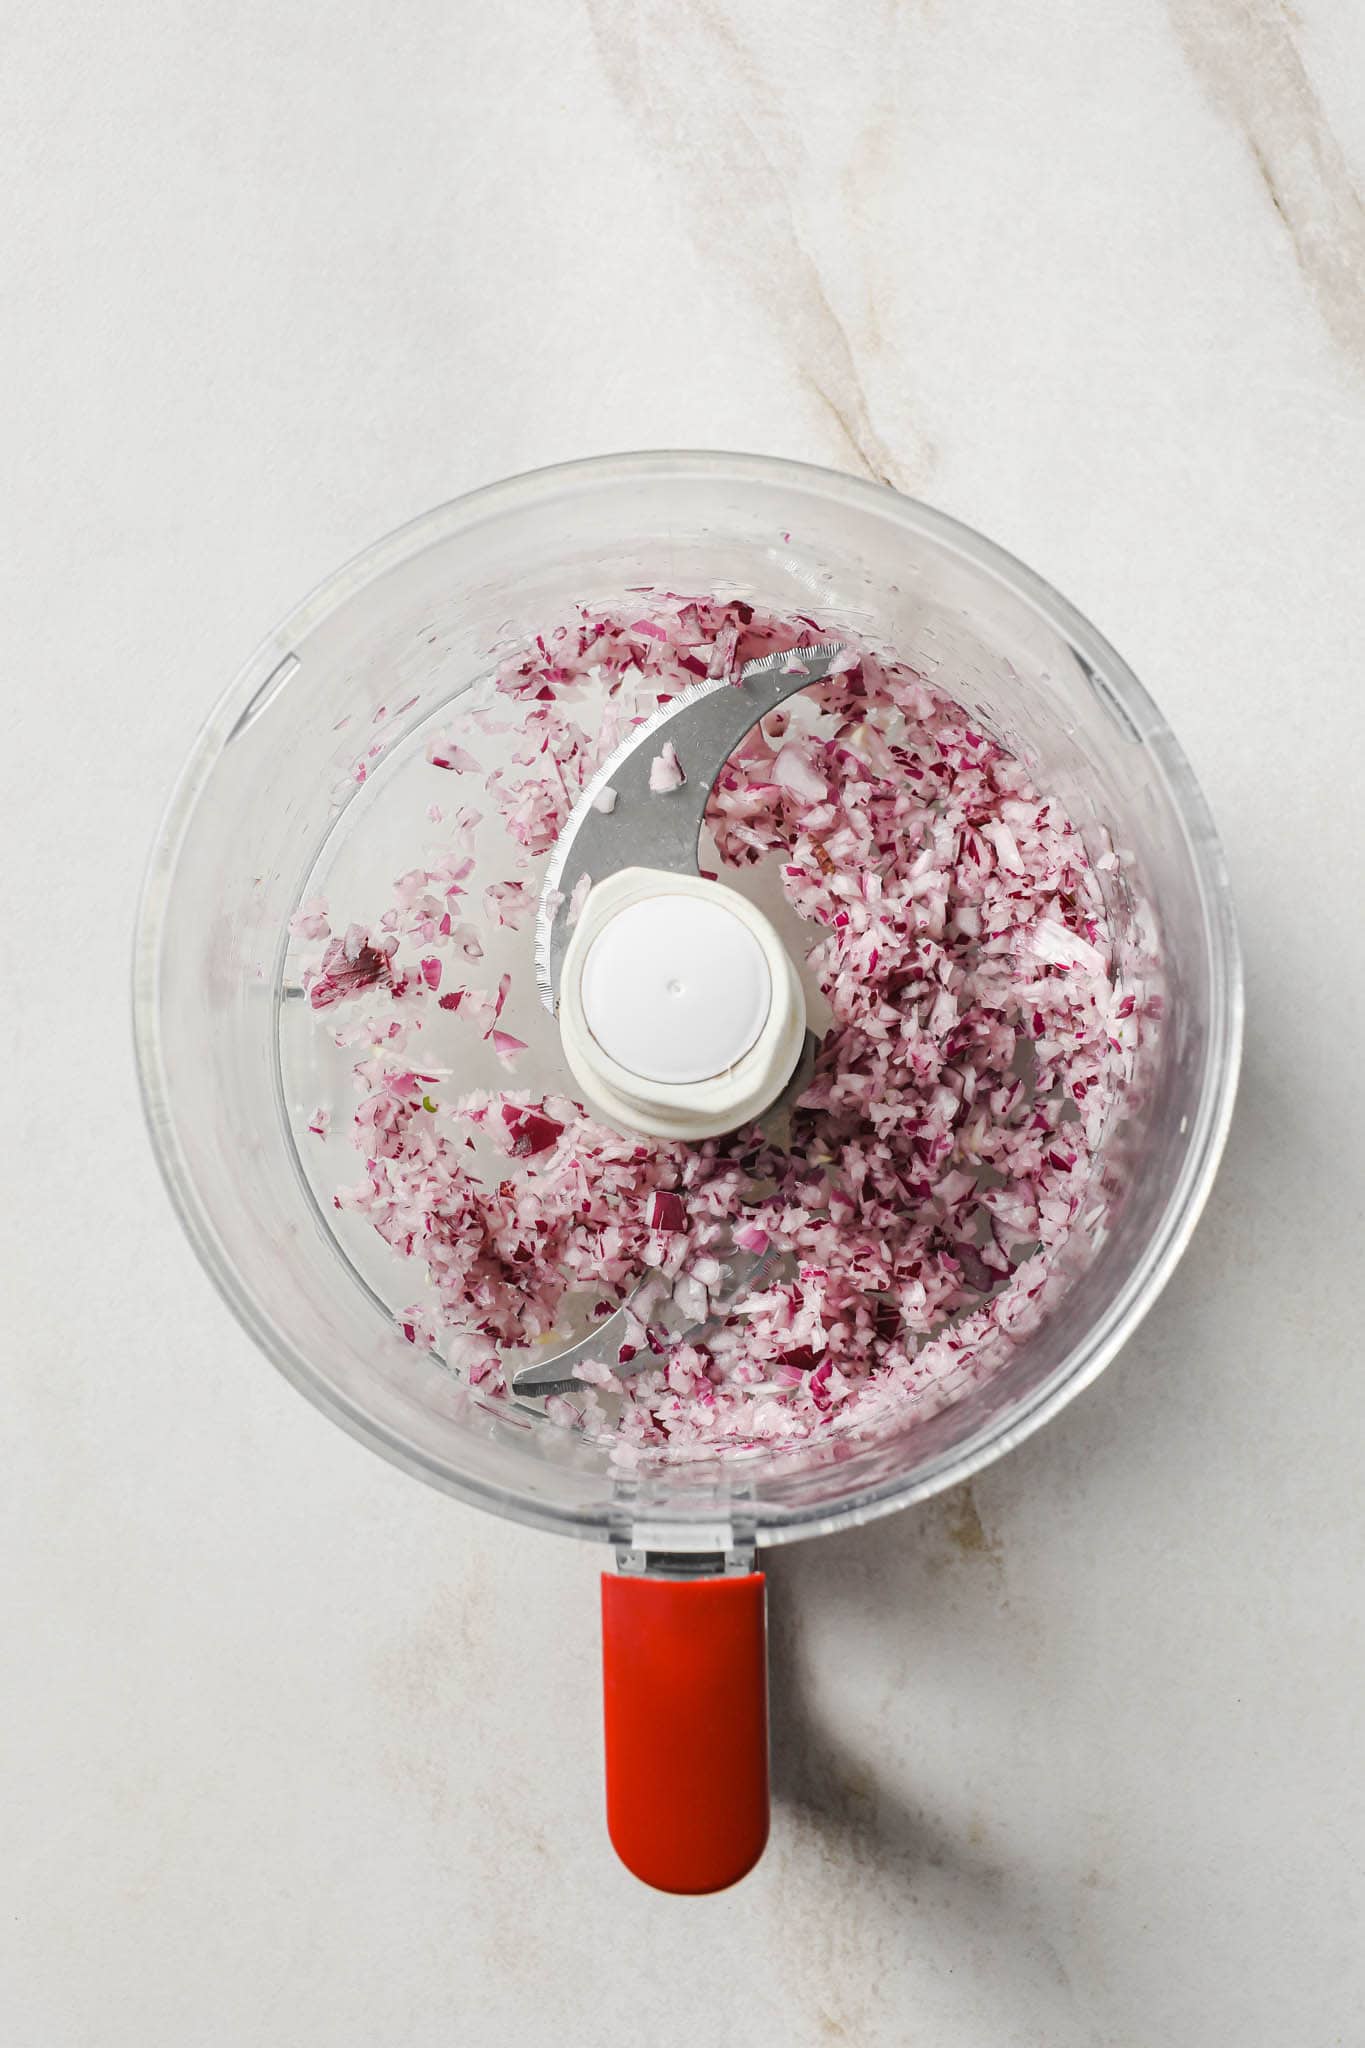 Finely chopped red onions in a food processor.